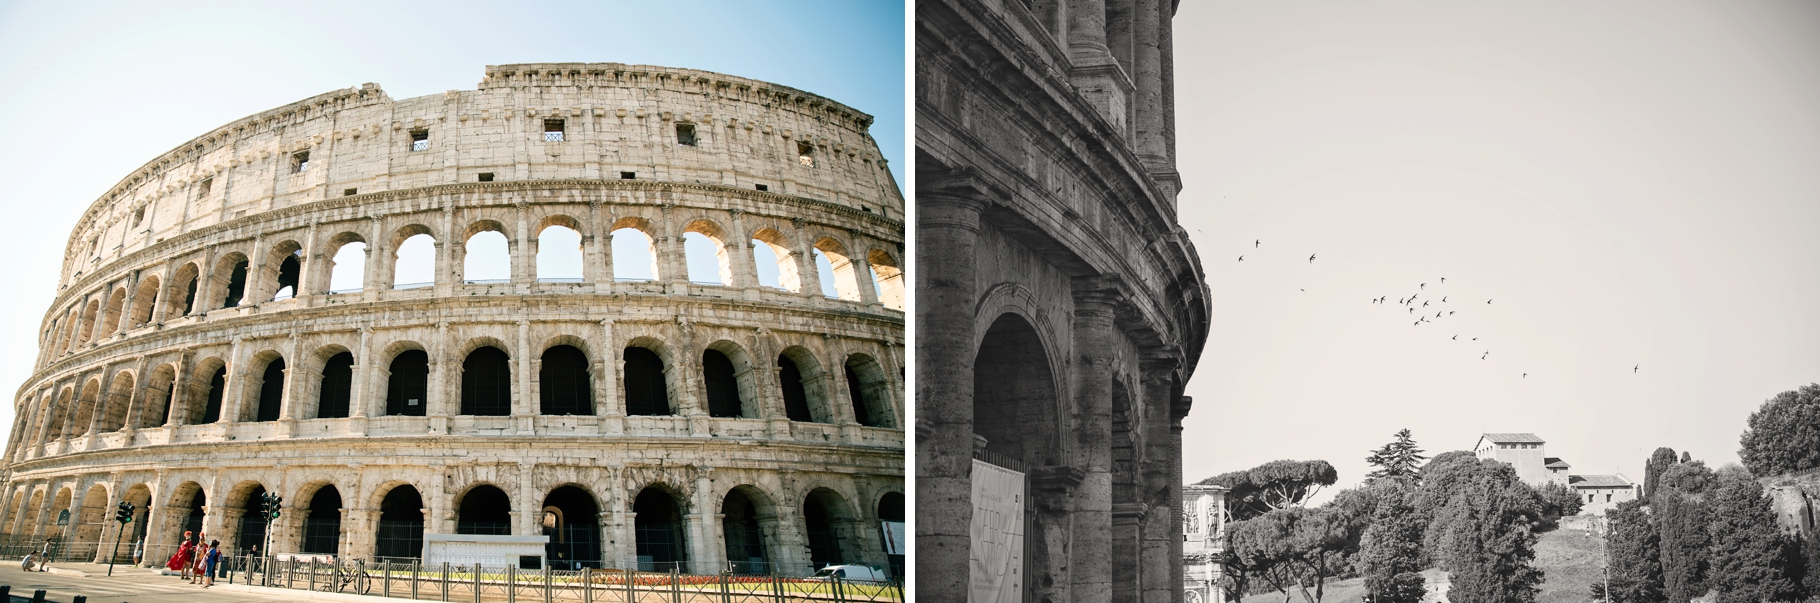 11- Colosseum-Rome-Italy-Europe-Travel-Anniversary-Trip-Photography-by-Betty-Elaine